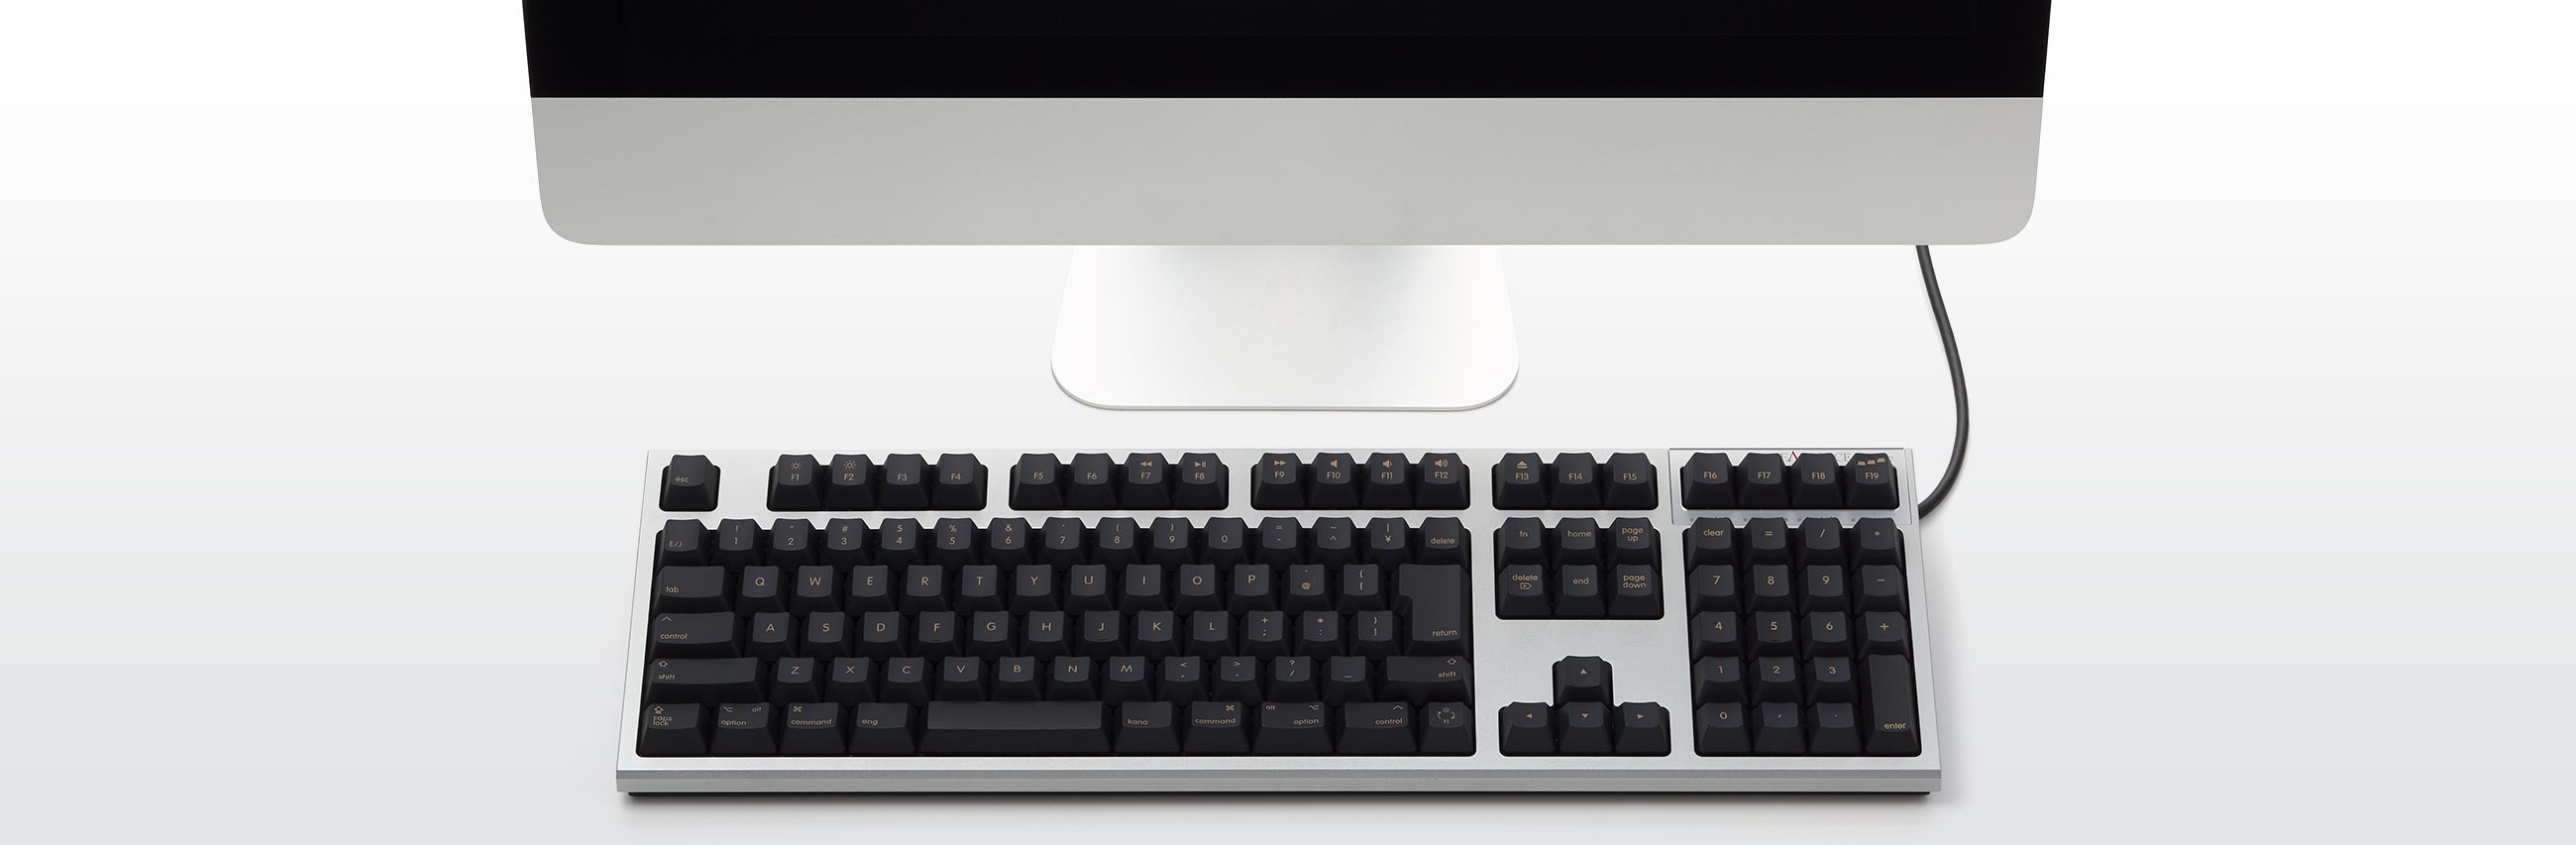 REALFORCE with Mac